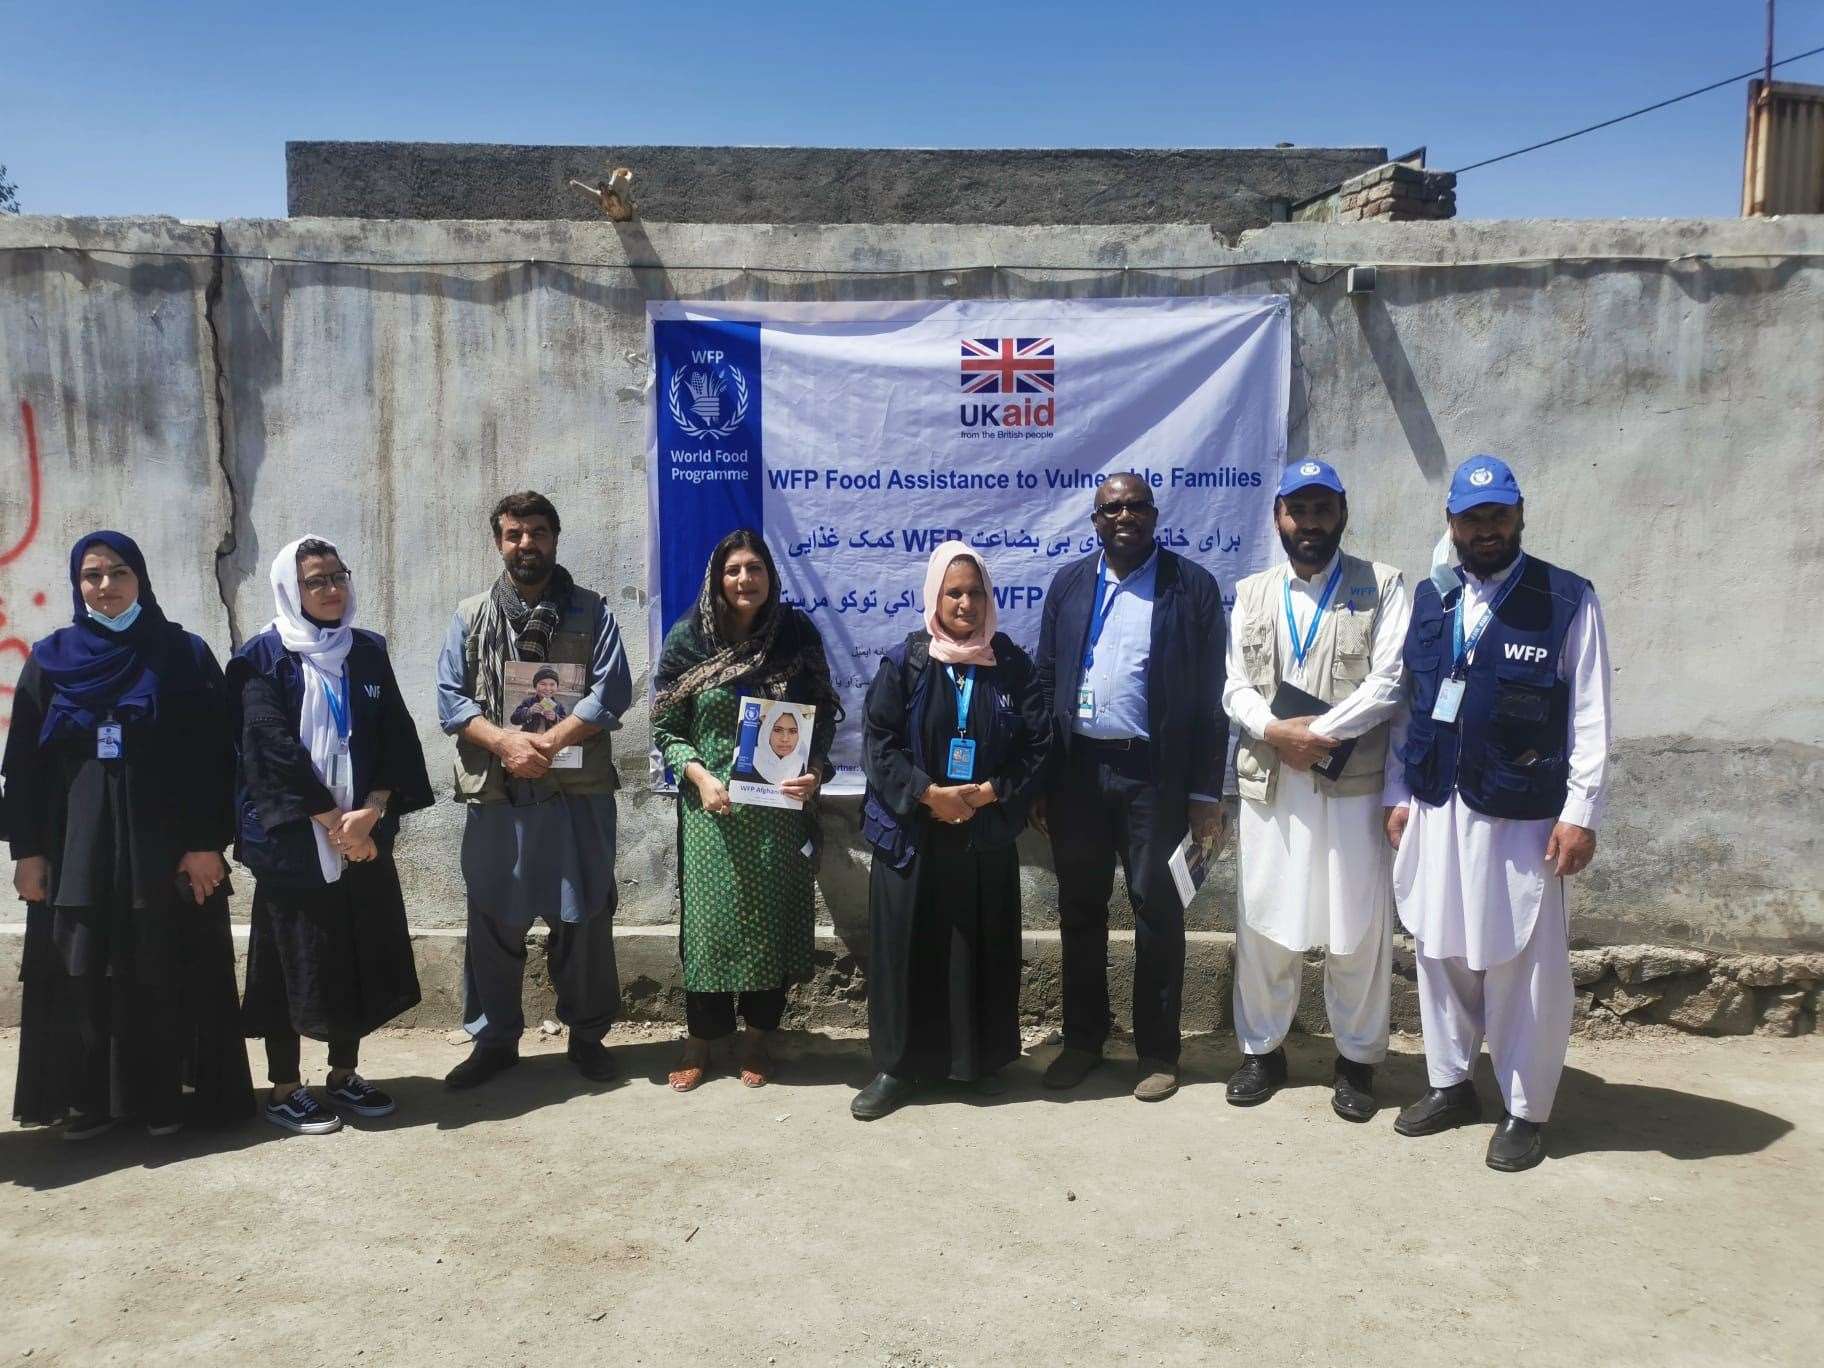 David Lammy and Preet Gill went to see the work done by the UN World Food Programme in Kabul (PA)